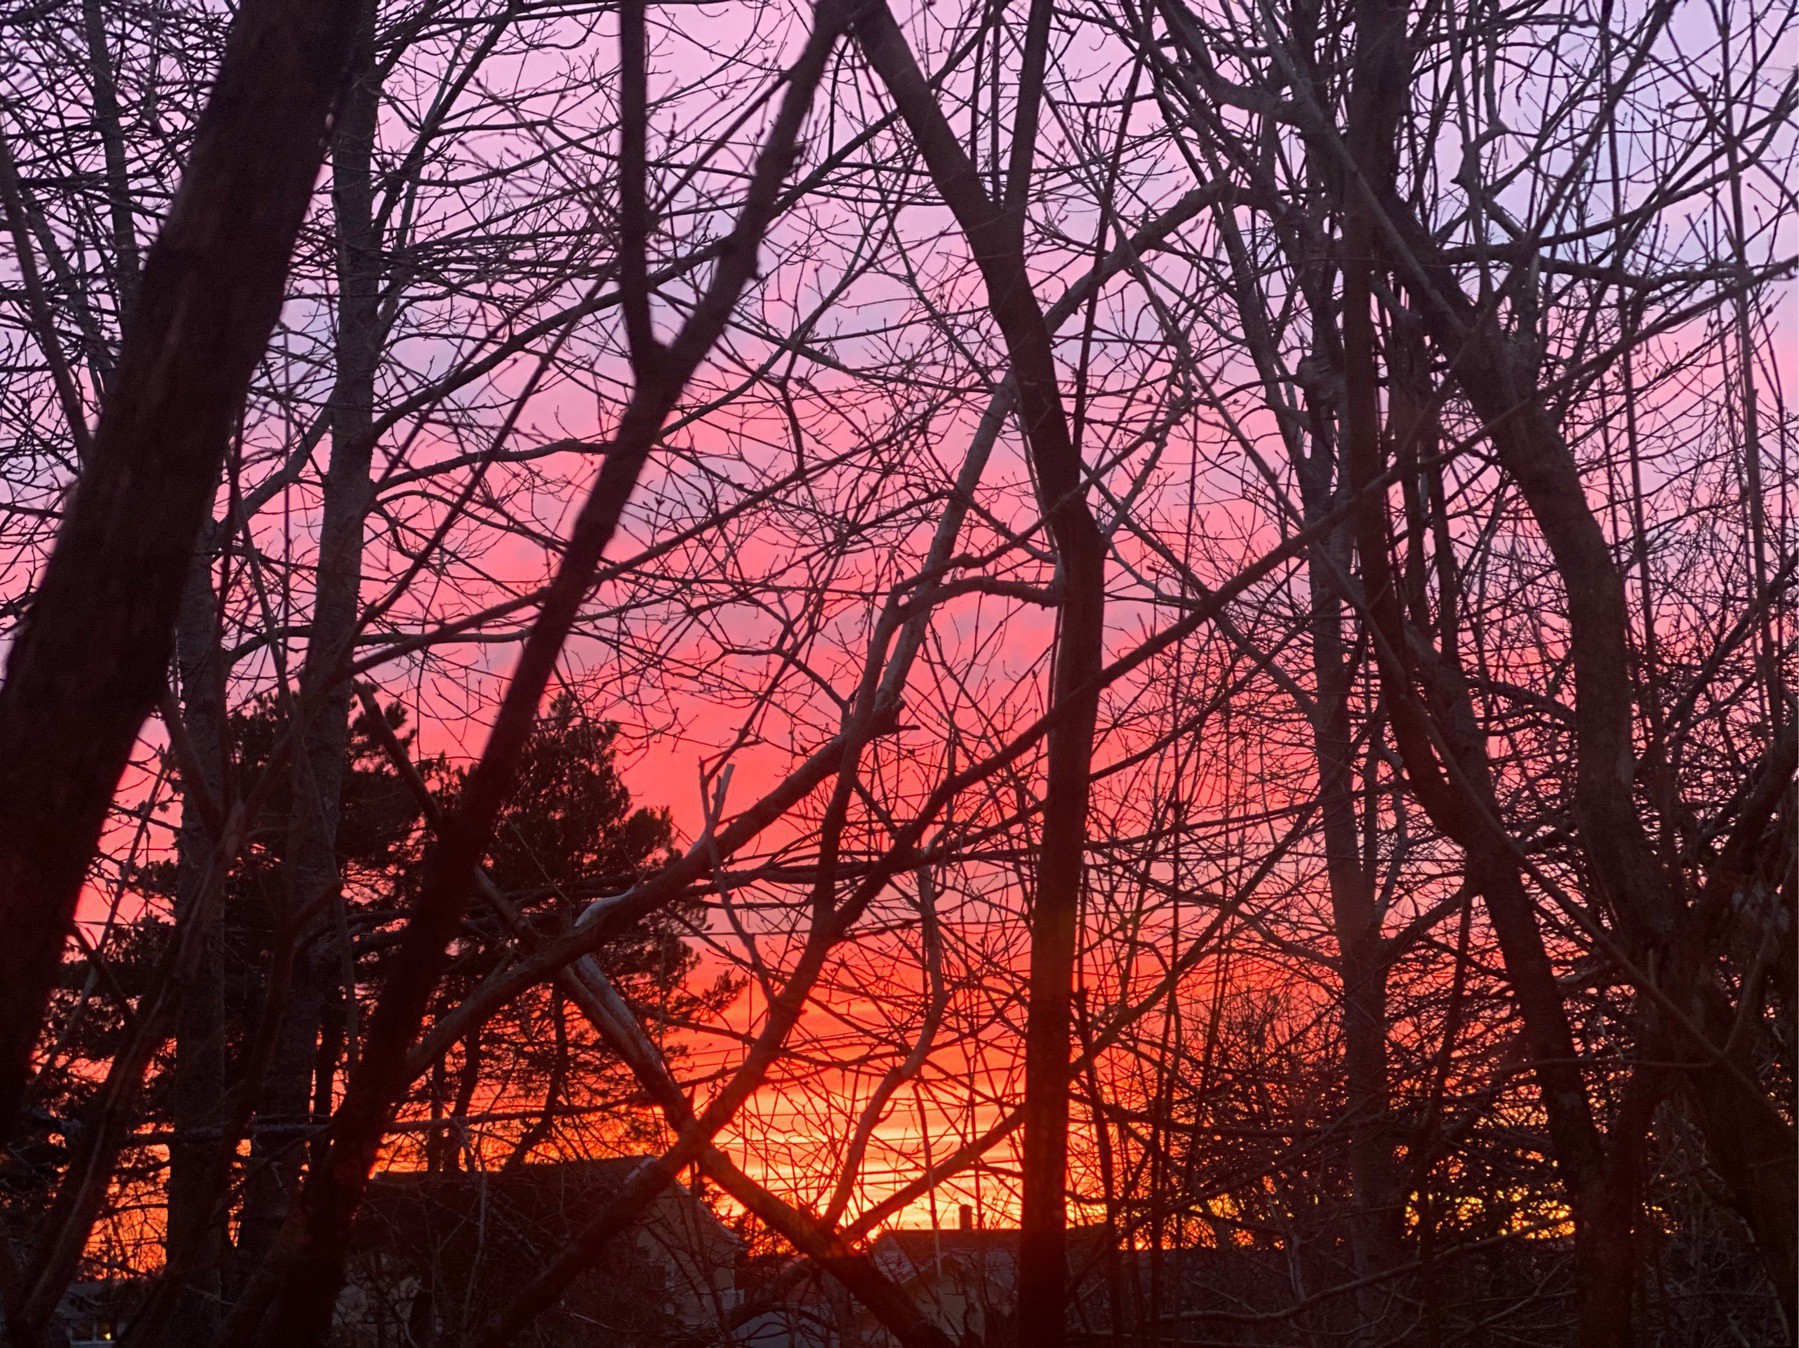 Sunset through branches.